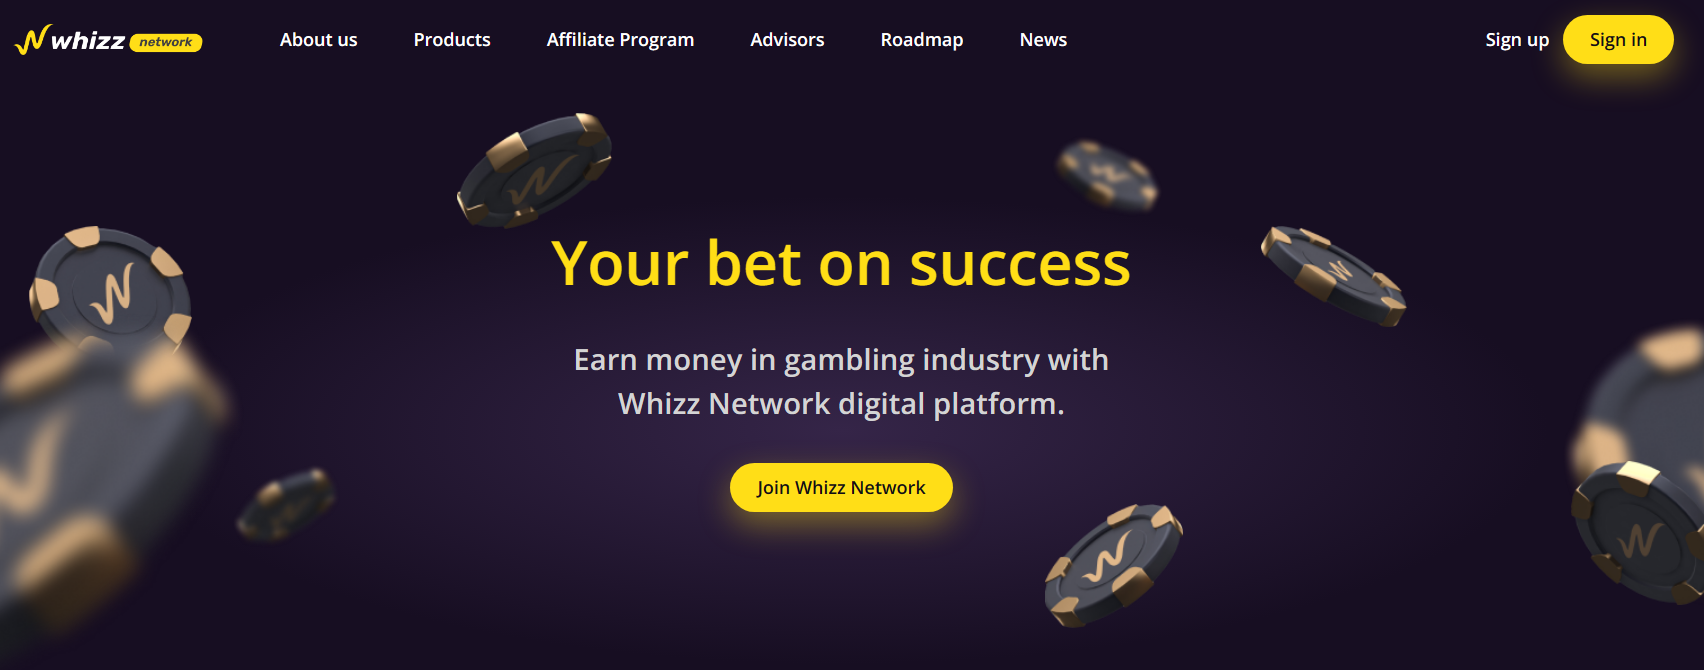 Homepage of Whizz Network